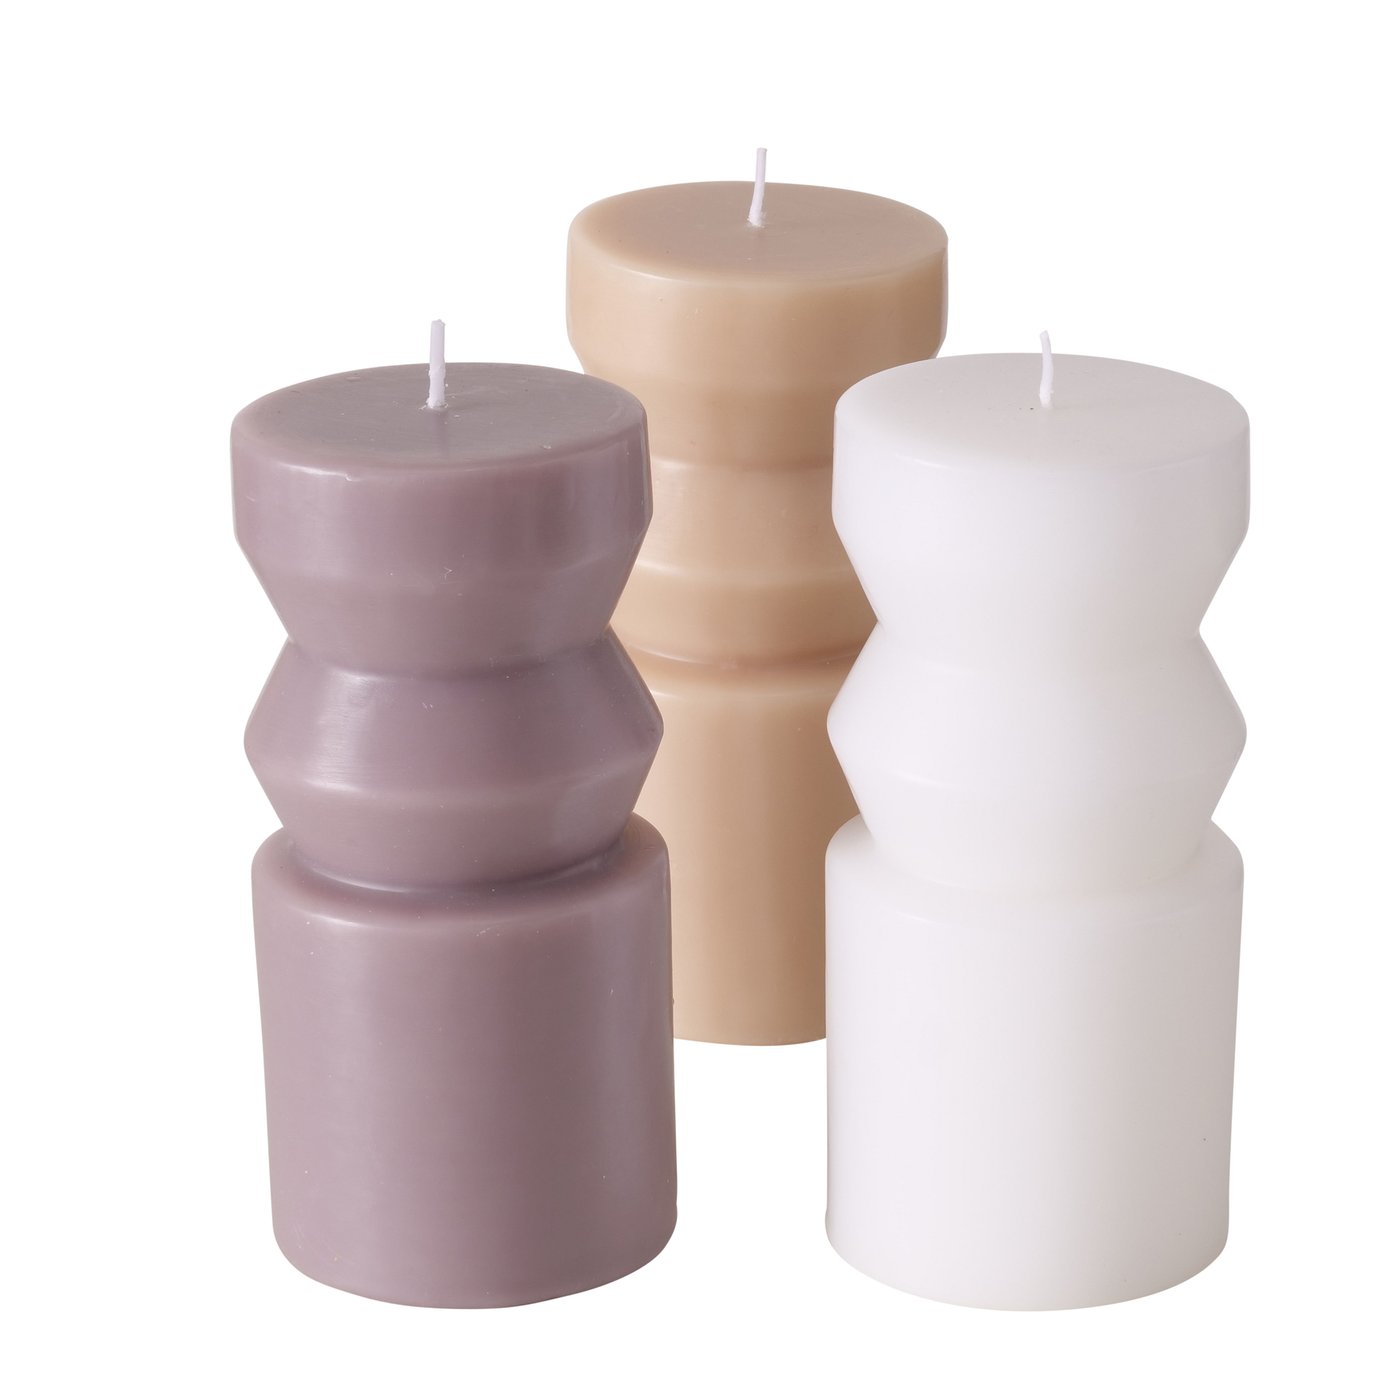 andquirky-celona-pillar-candle-beige-brown-or-white